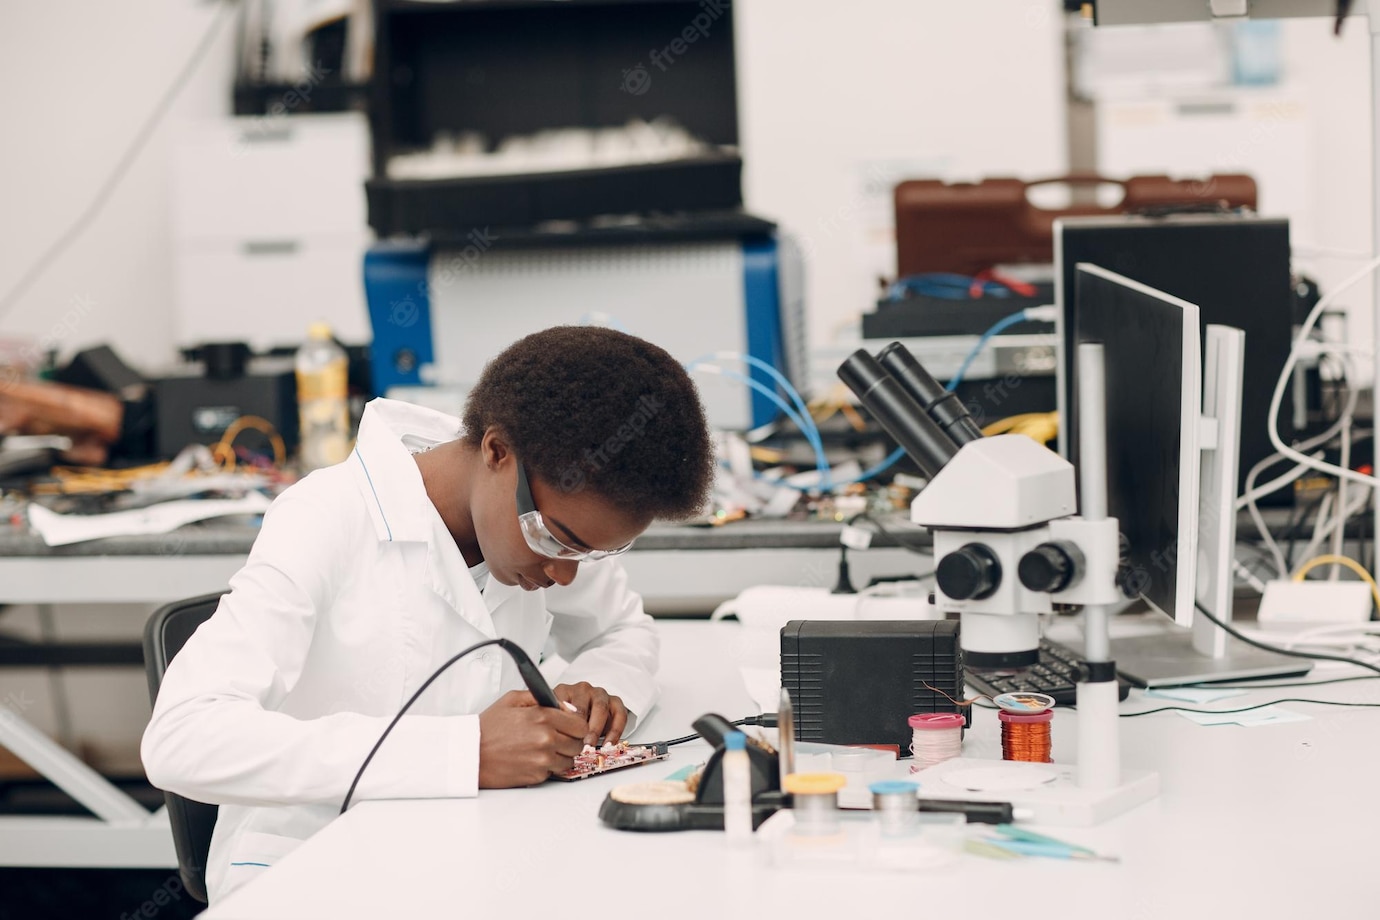 scientist-african-american-woman-working-laboratory-with-electronic-instruments_183314-7980